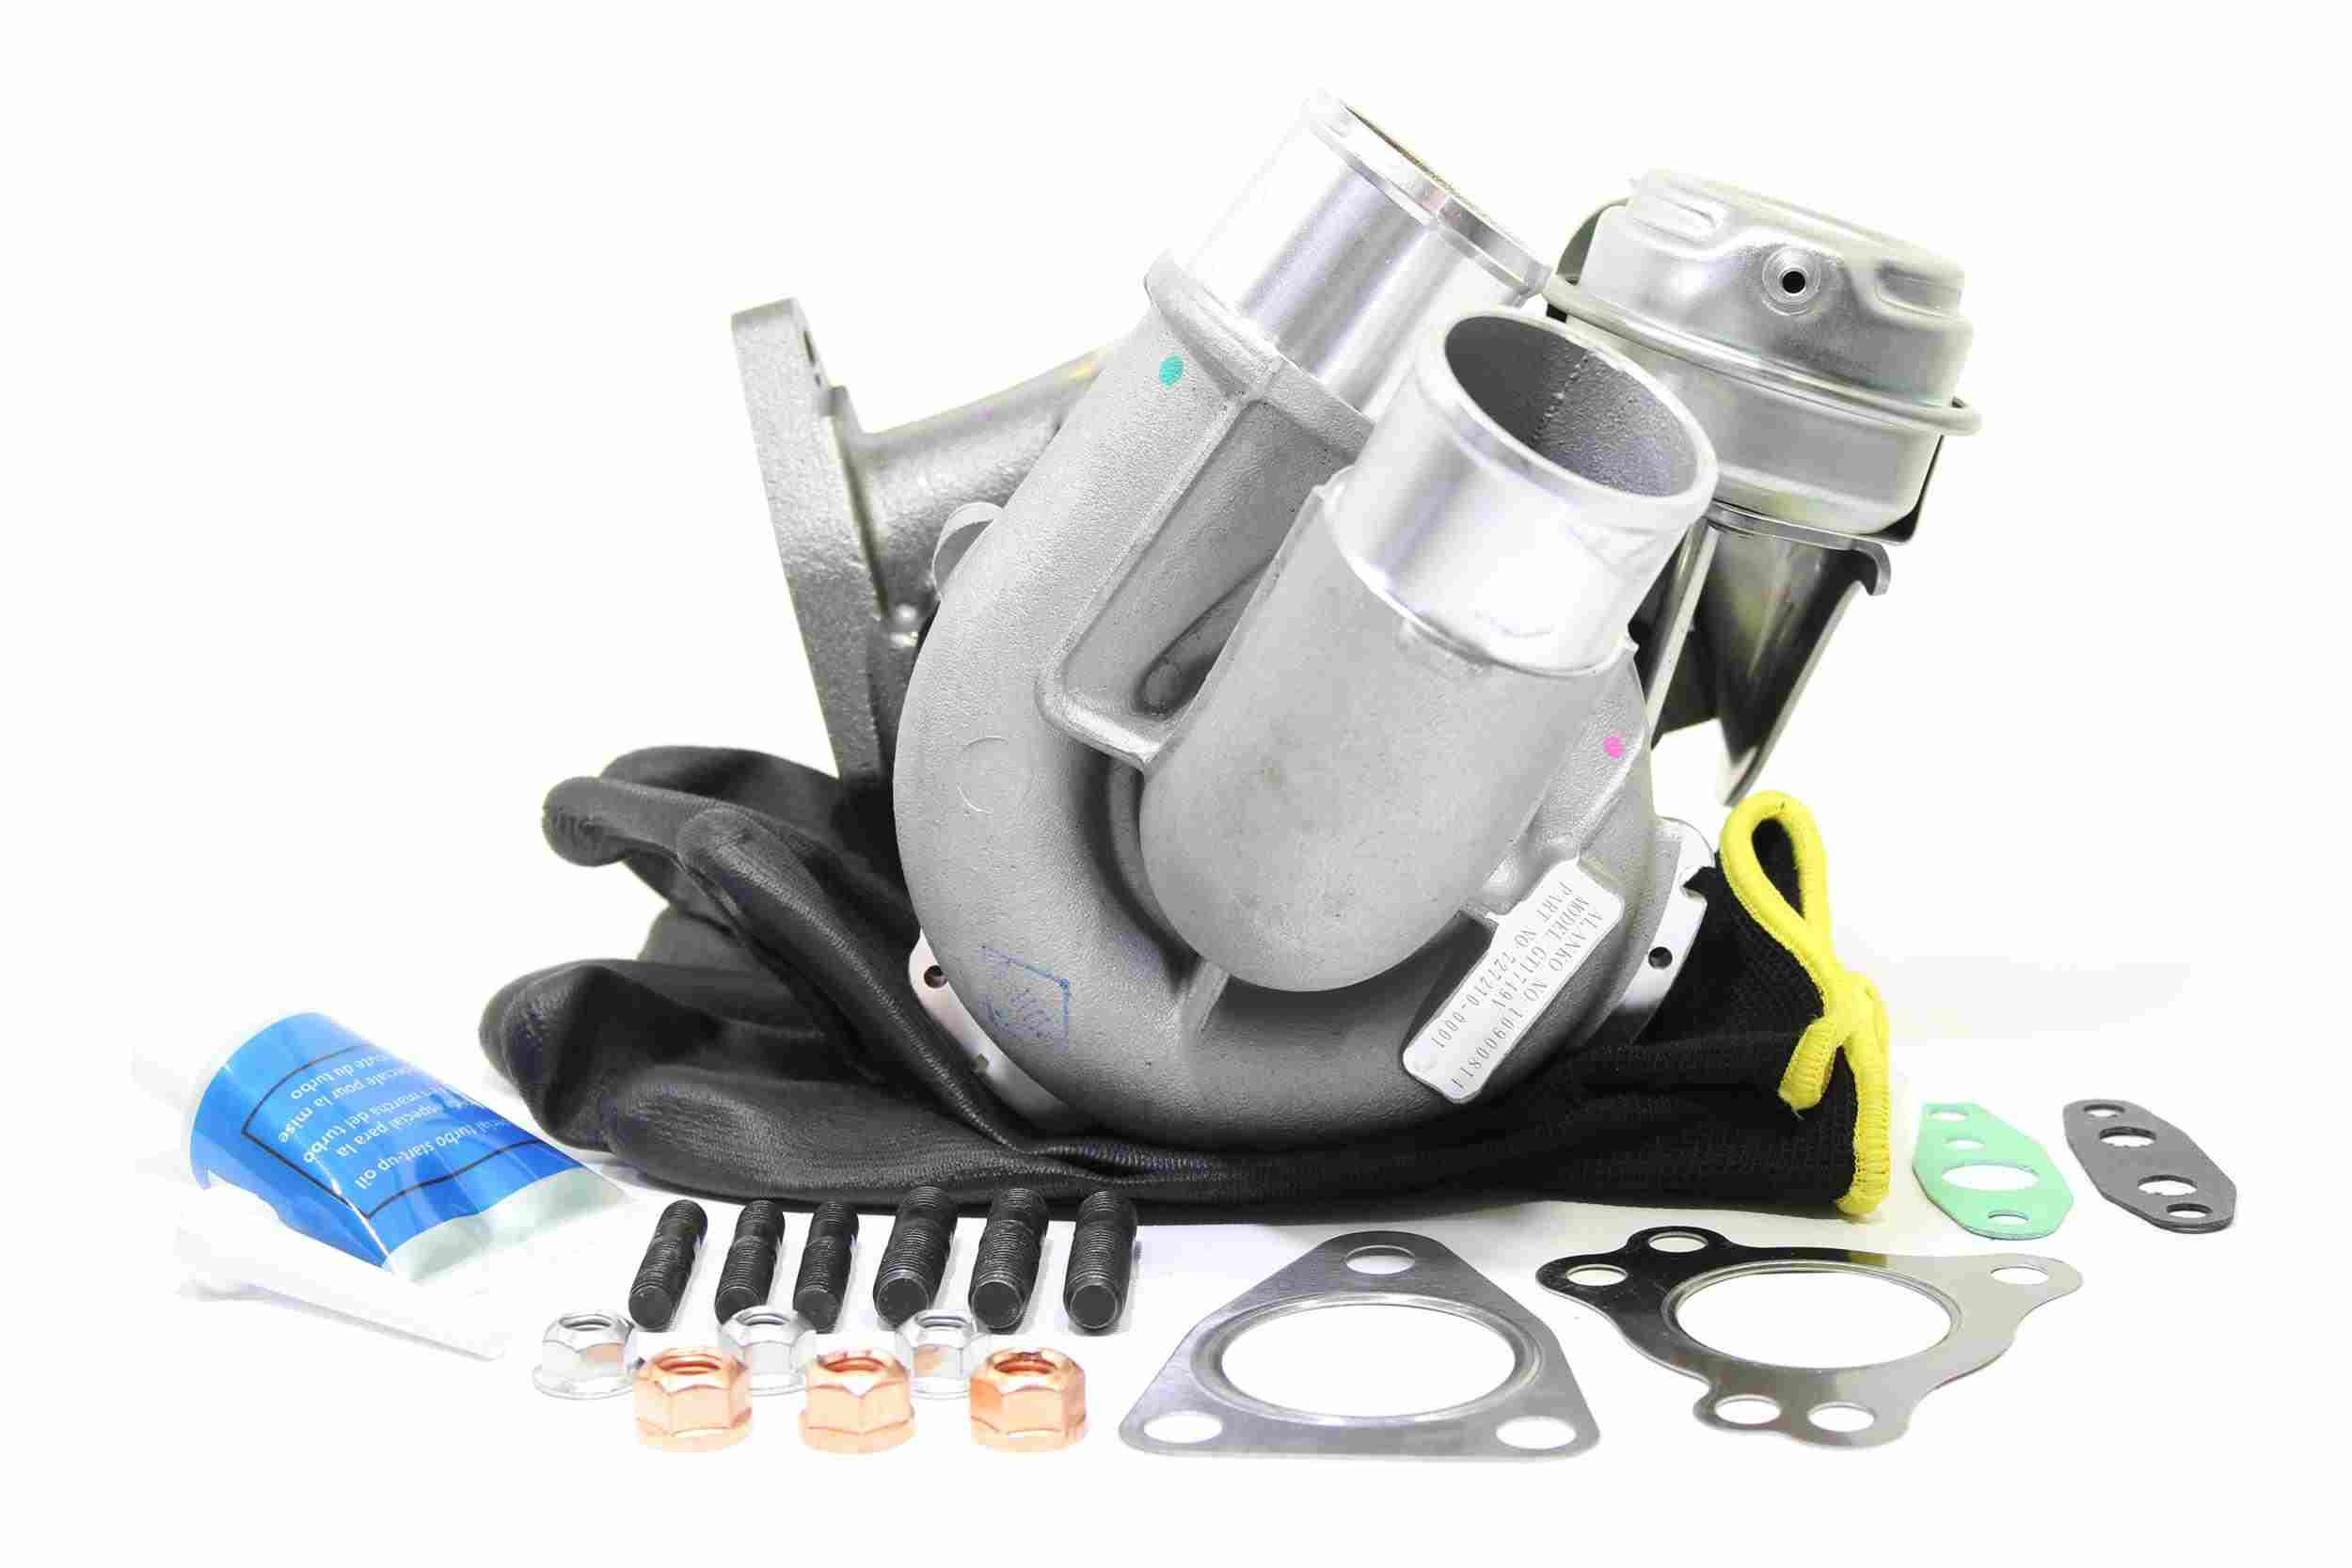 ALANKO 10900814 Turbocharger Exhaust Turbocharger, Incl. Gasket Set, with attachment material